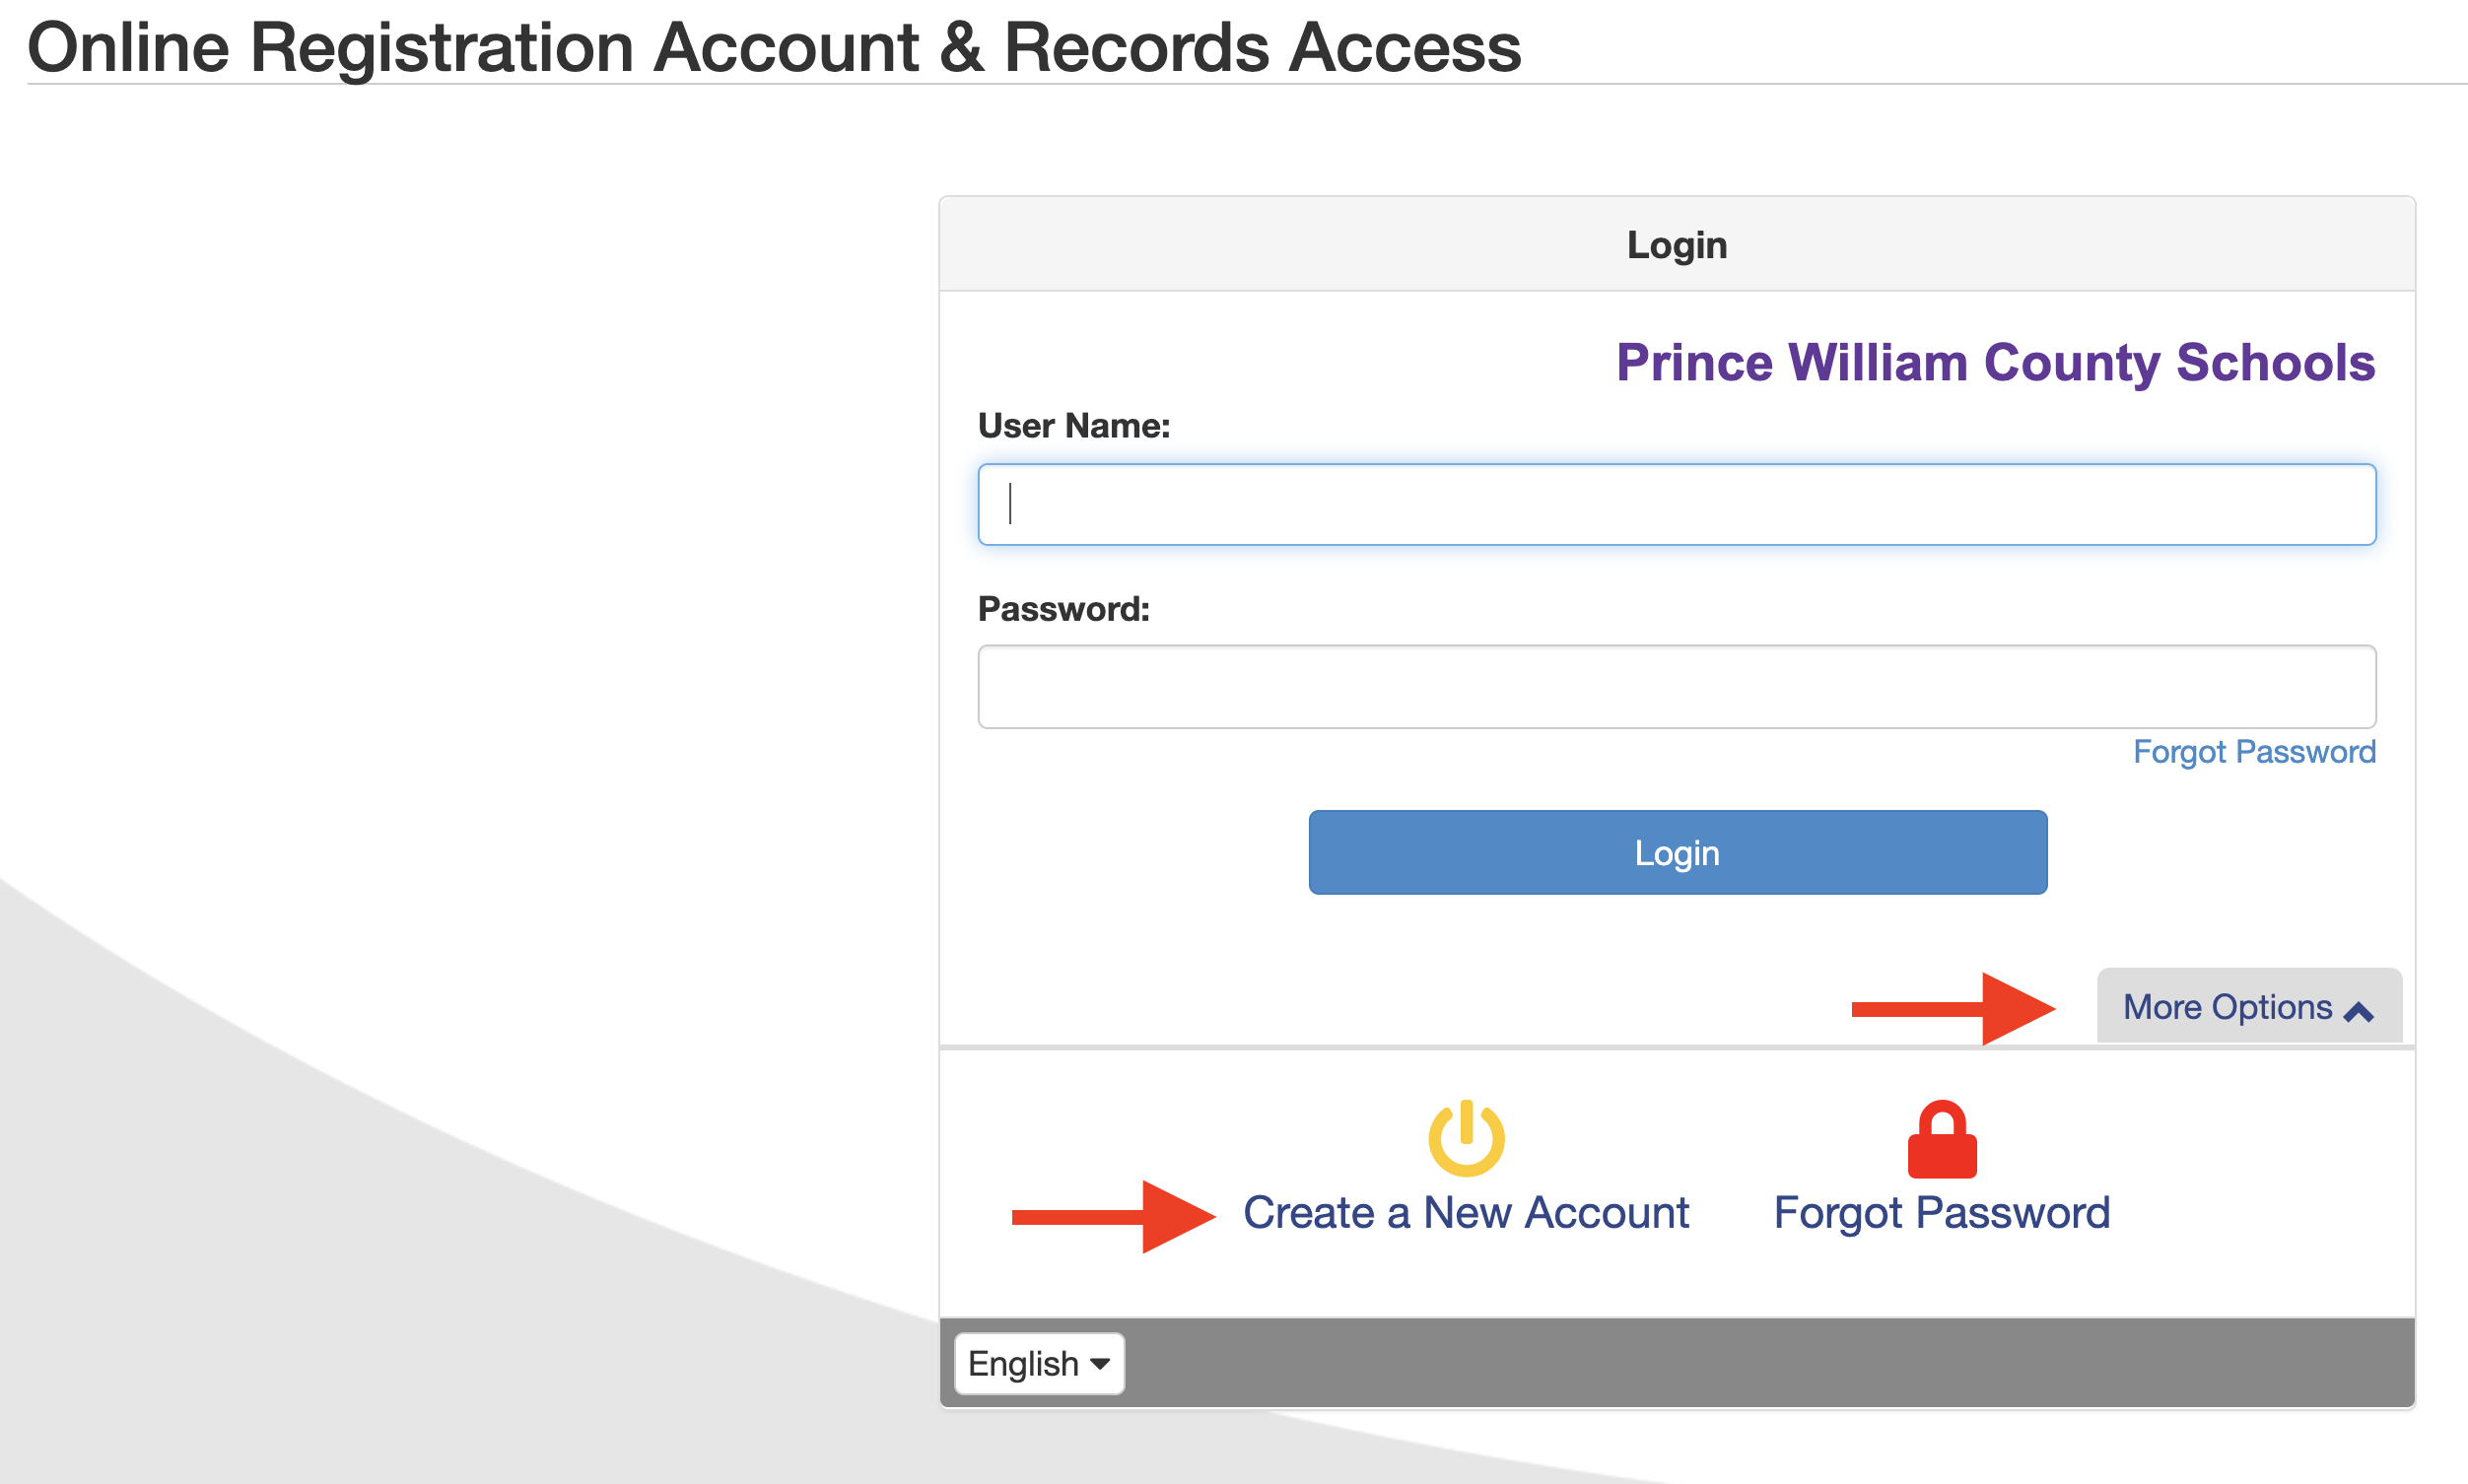 Screenshot of Online Registration Account and Records Access screen